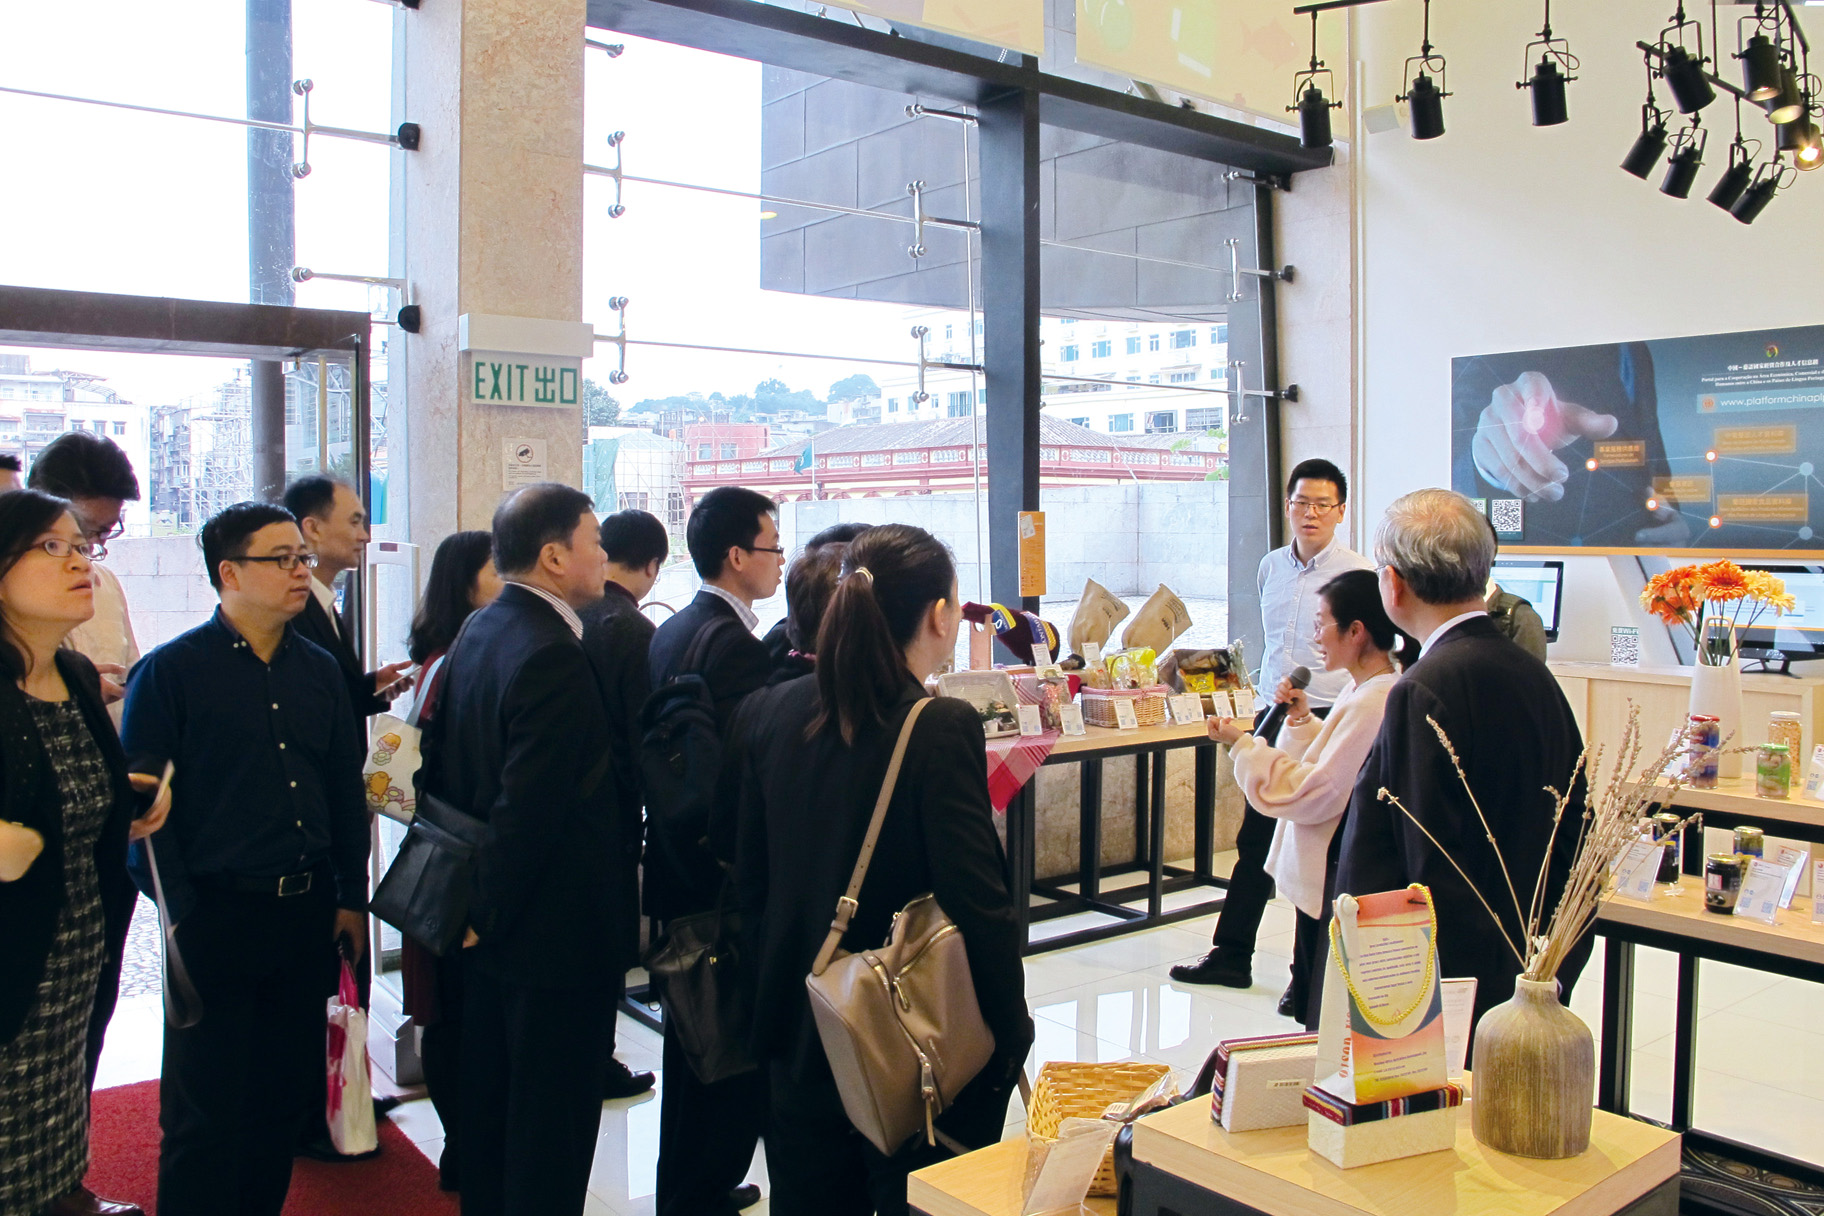 A Business Delegation from Shanghai visits the Portuguese-speaking Countries Food Products Exhibition Centre <br>(6 December 2016)